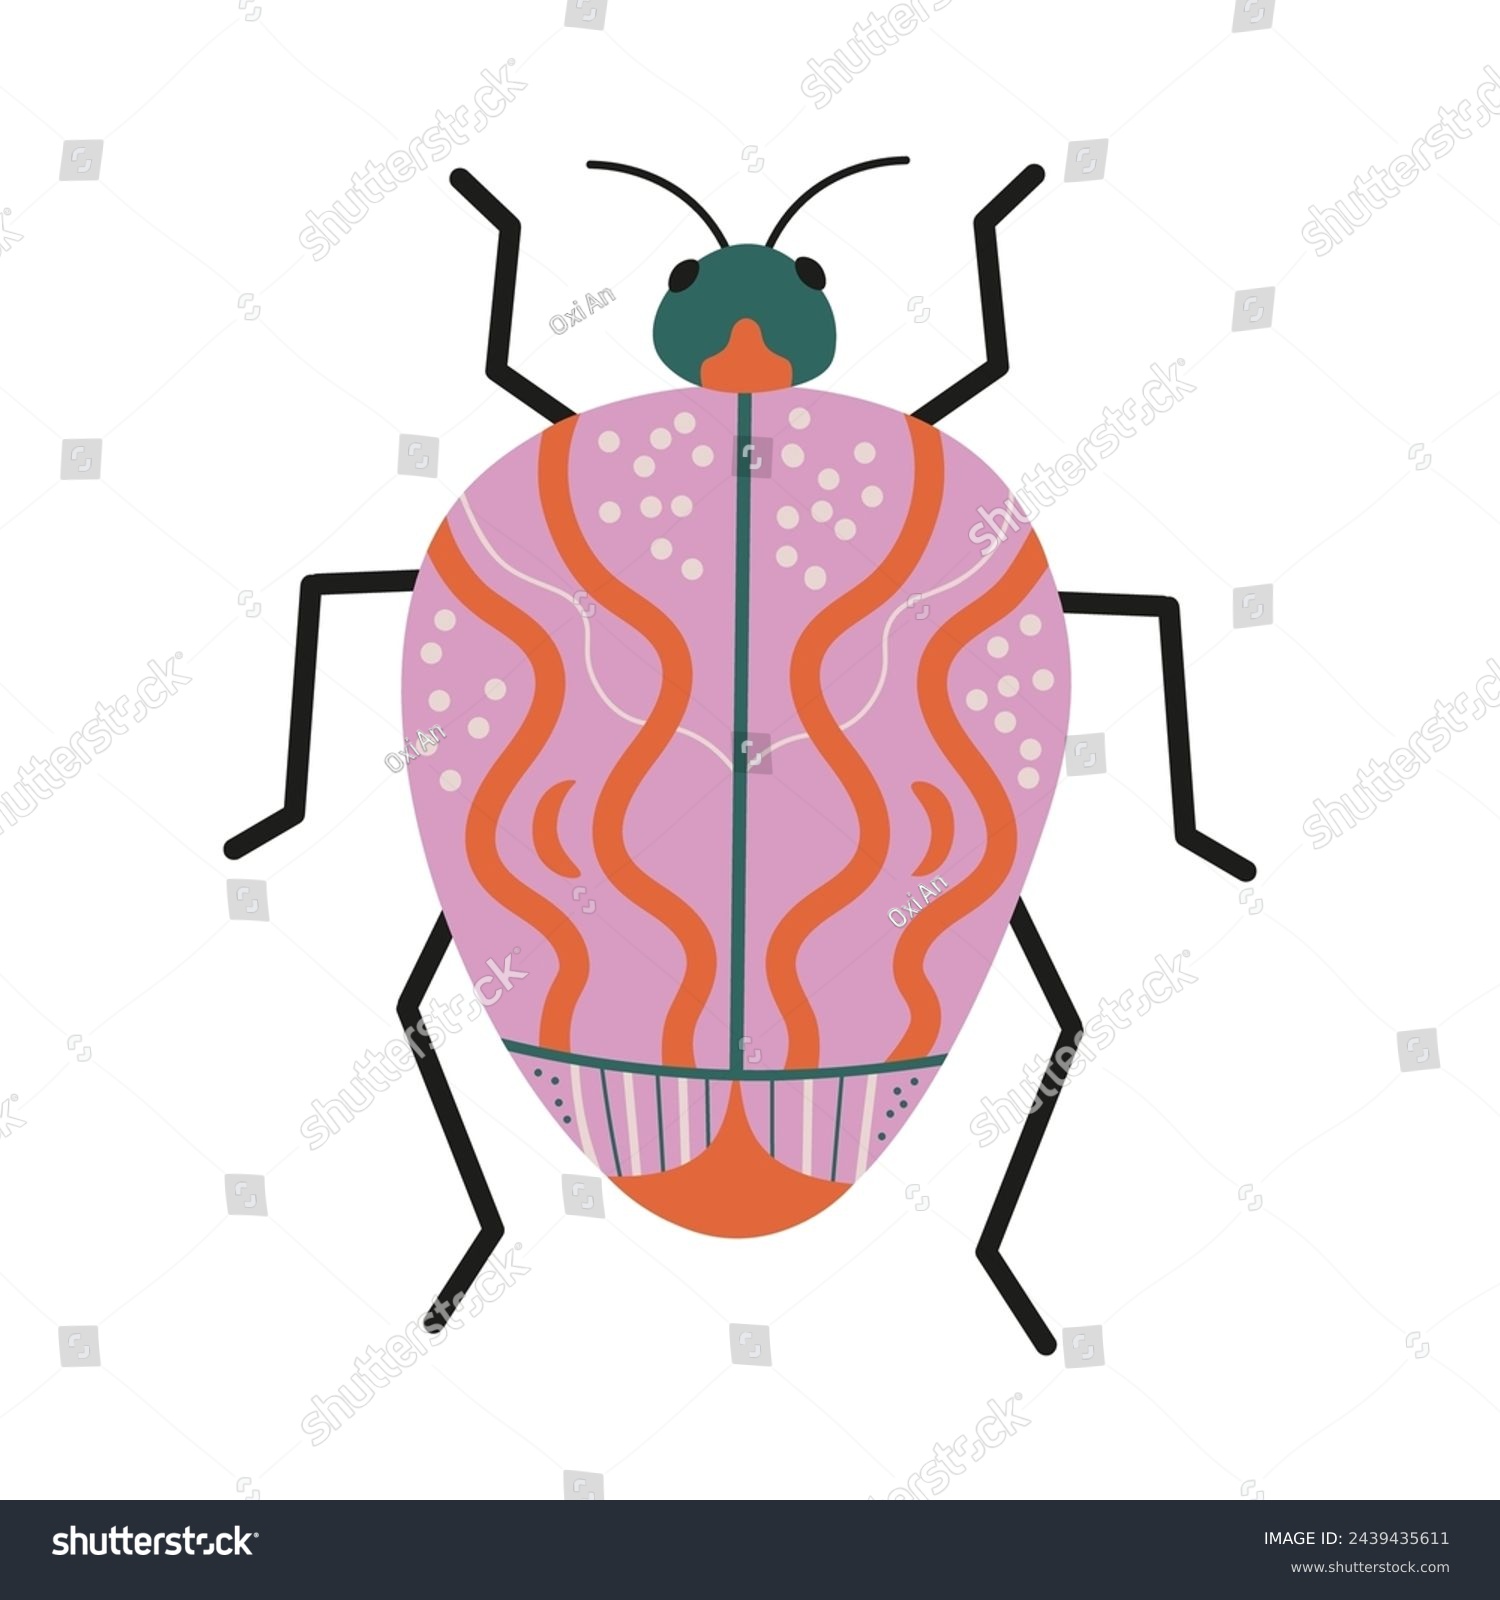 SVG of Beetle hand drawn flat vector illustration, fantastic bug on isolated background. Decorative abstract Insect fantasy fauna species, wild life, animal. For icon, logo, card, print, paper, flyer, sign svg